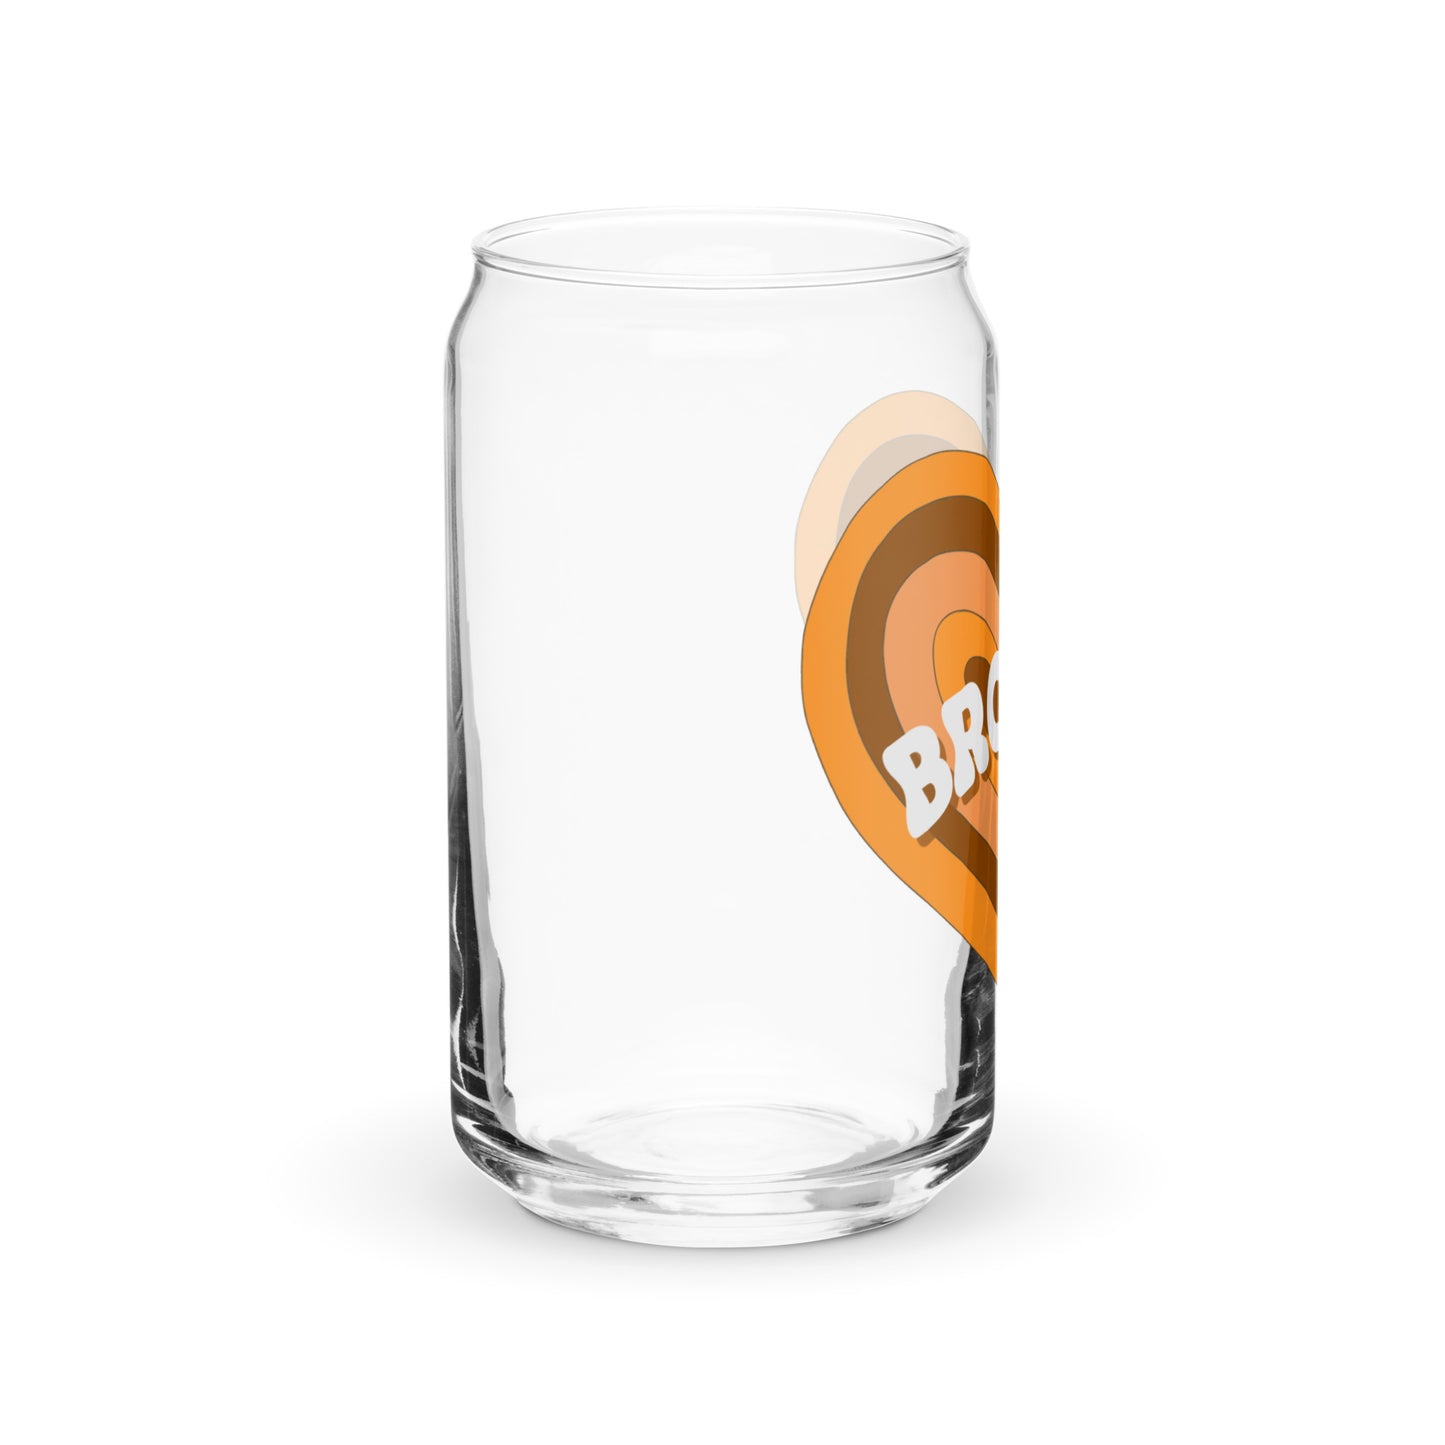 Browns Retro Heart Can-shaped glass